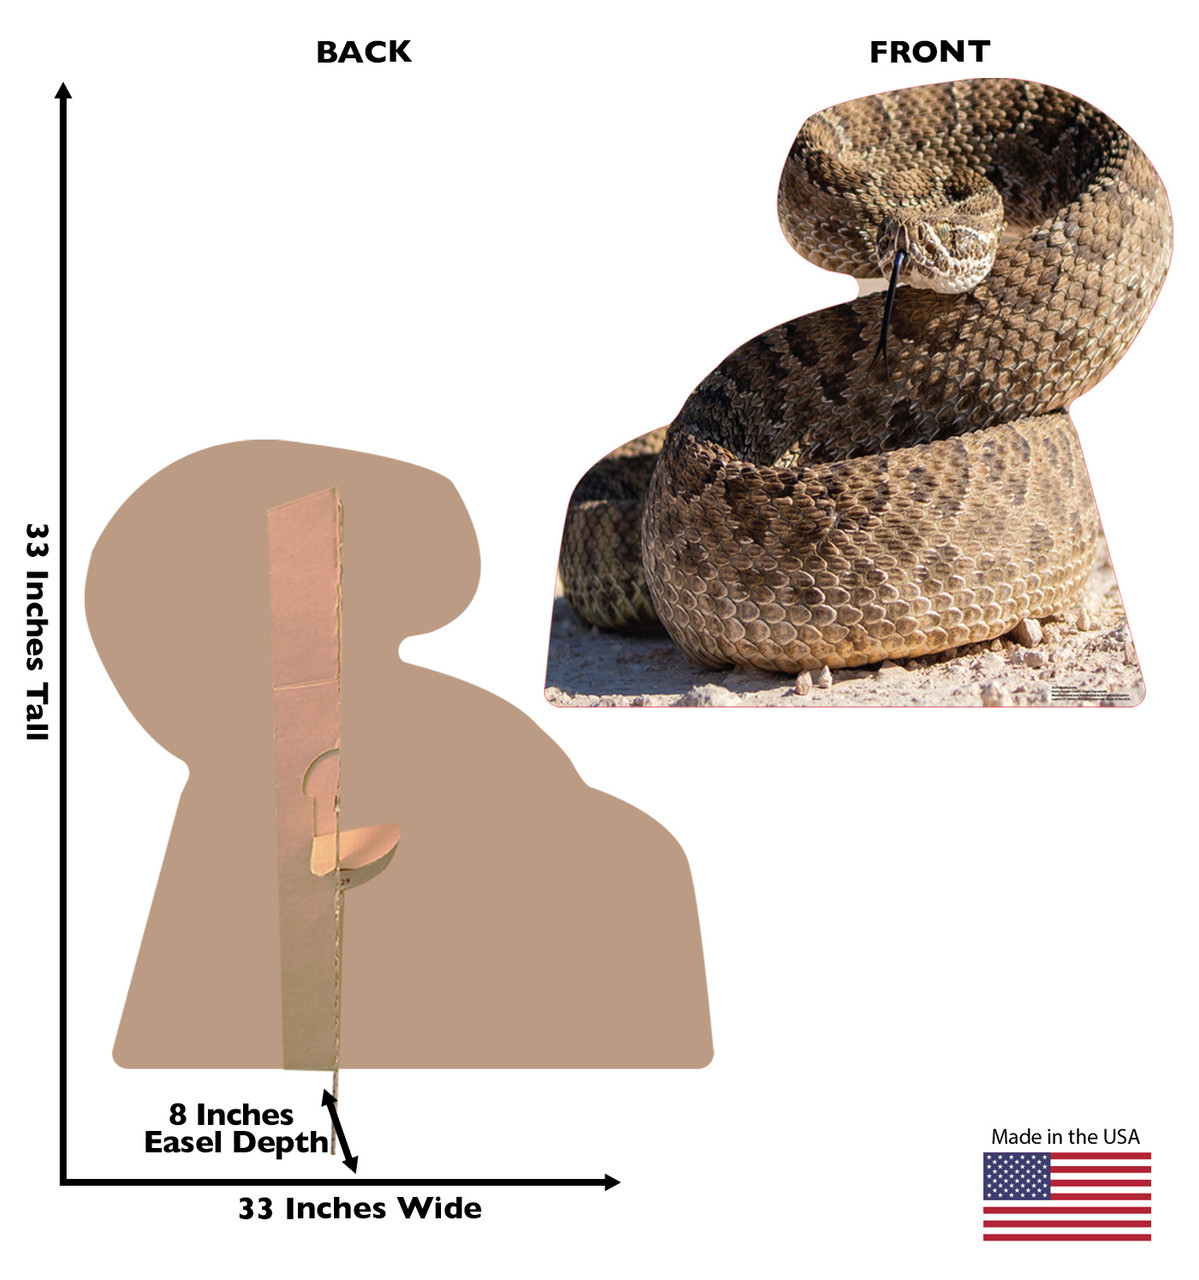 Life-size cardboard standee of a Rattlesnake with back and front dimensions.